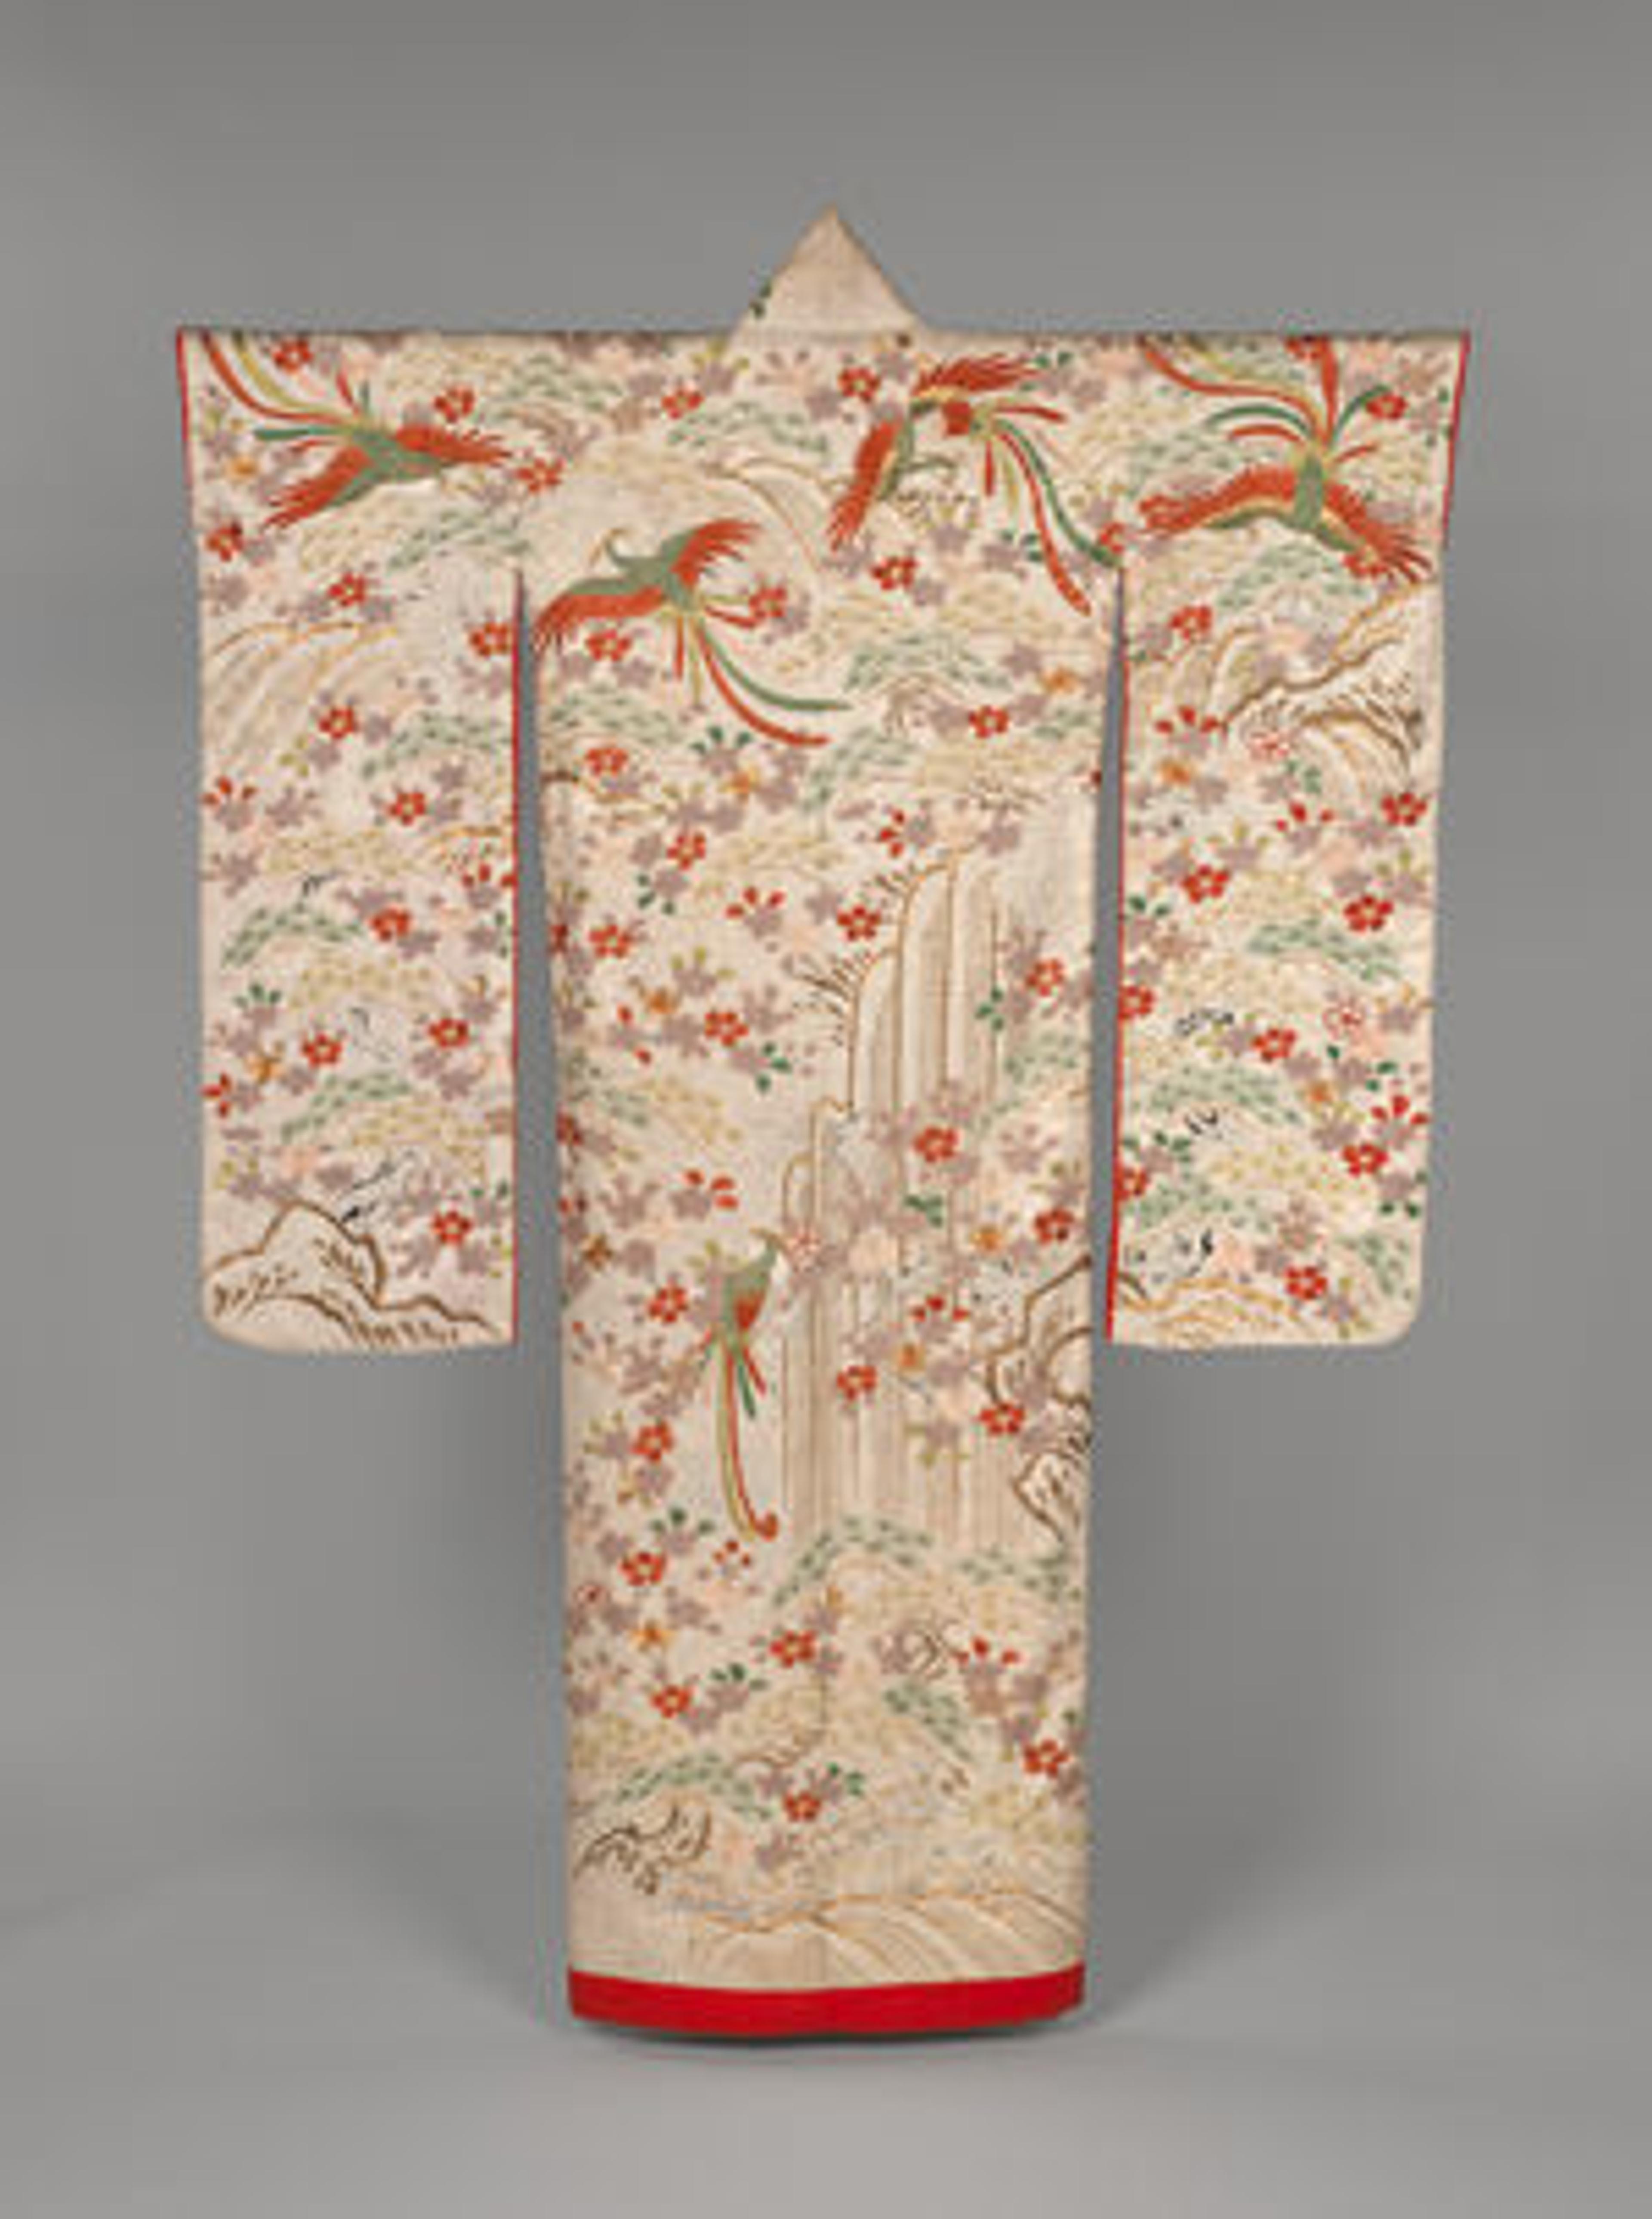 Over Robe (Uchikake) with Long-Tailed Birds in a Landscape, second half of the 18th century | Japan, Edo period (1615–1868) | 59.46 